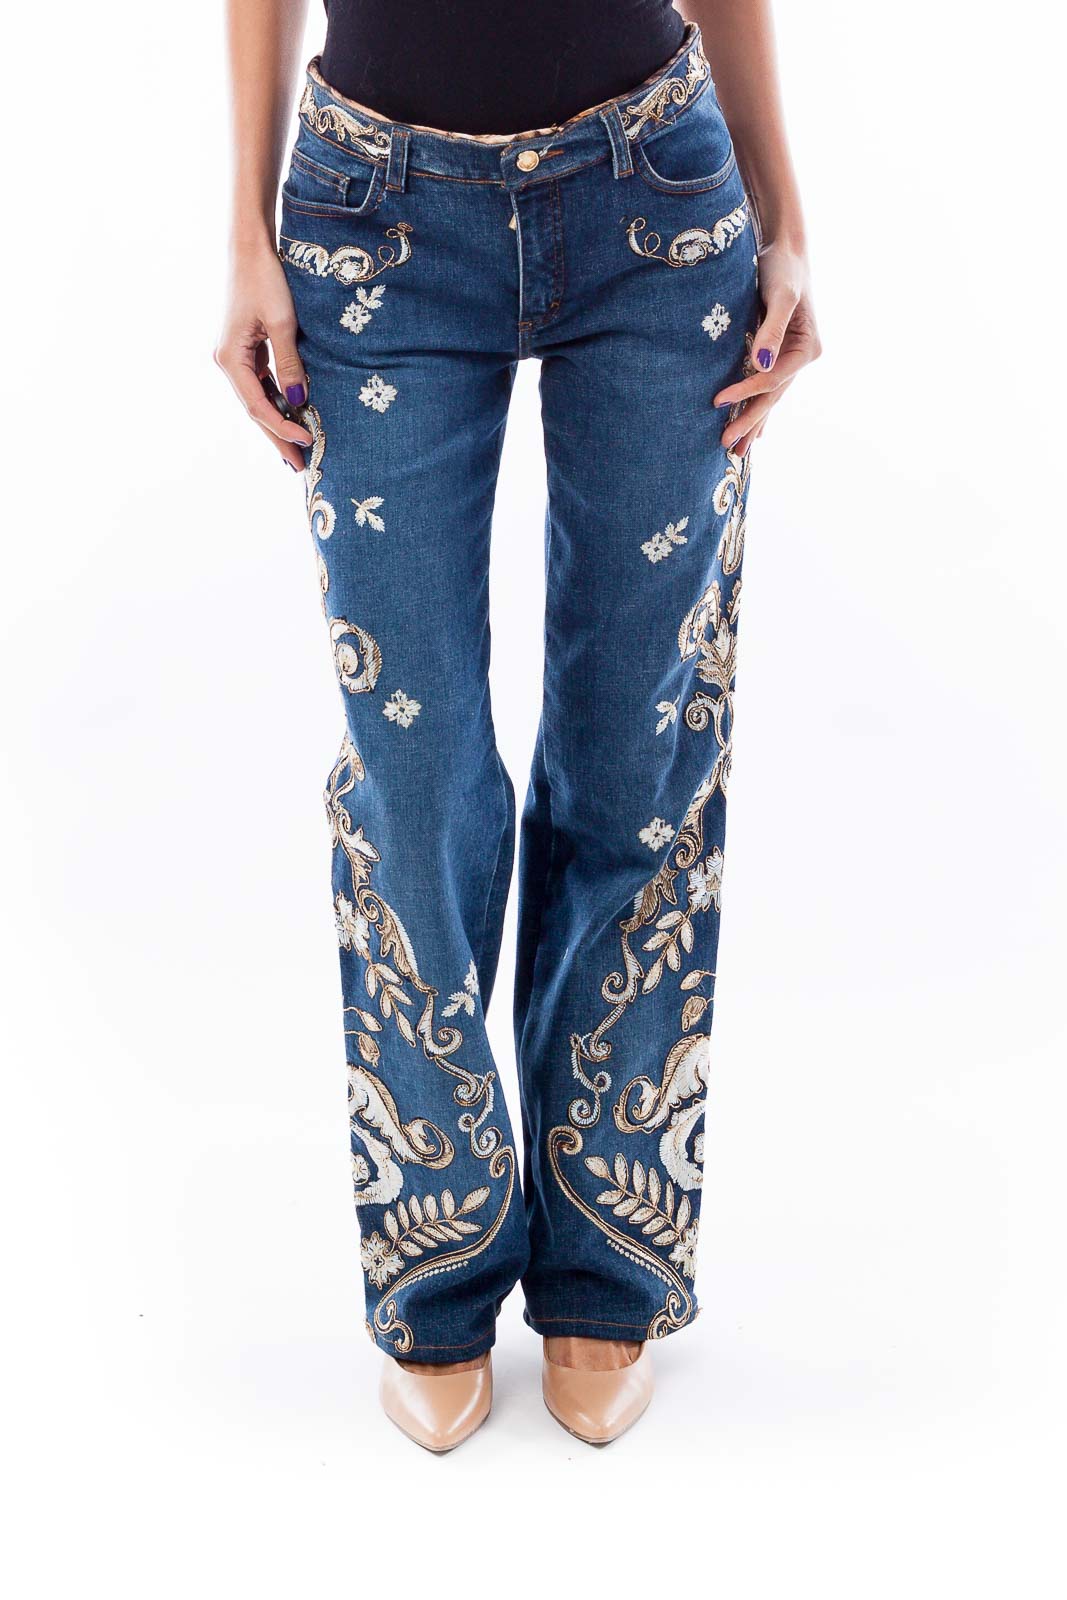 Gold and White Paisley Embroidered Jeans Front